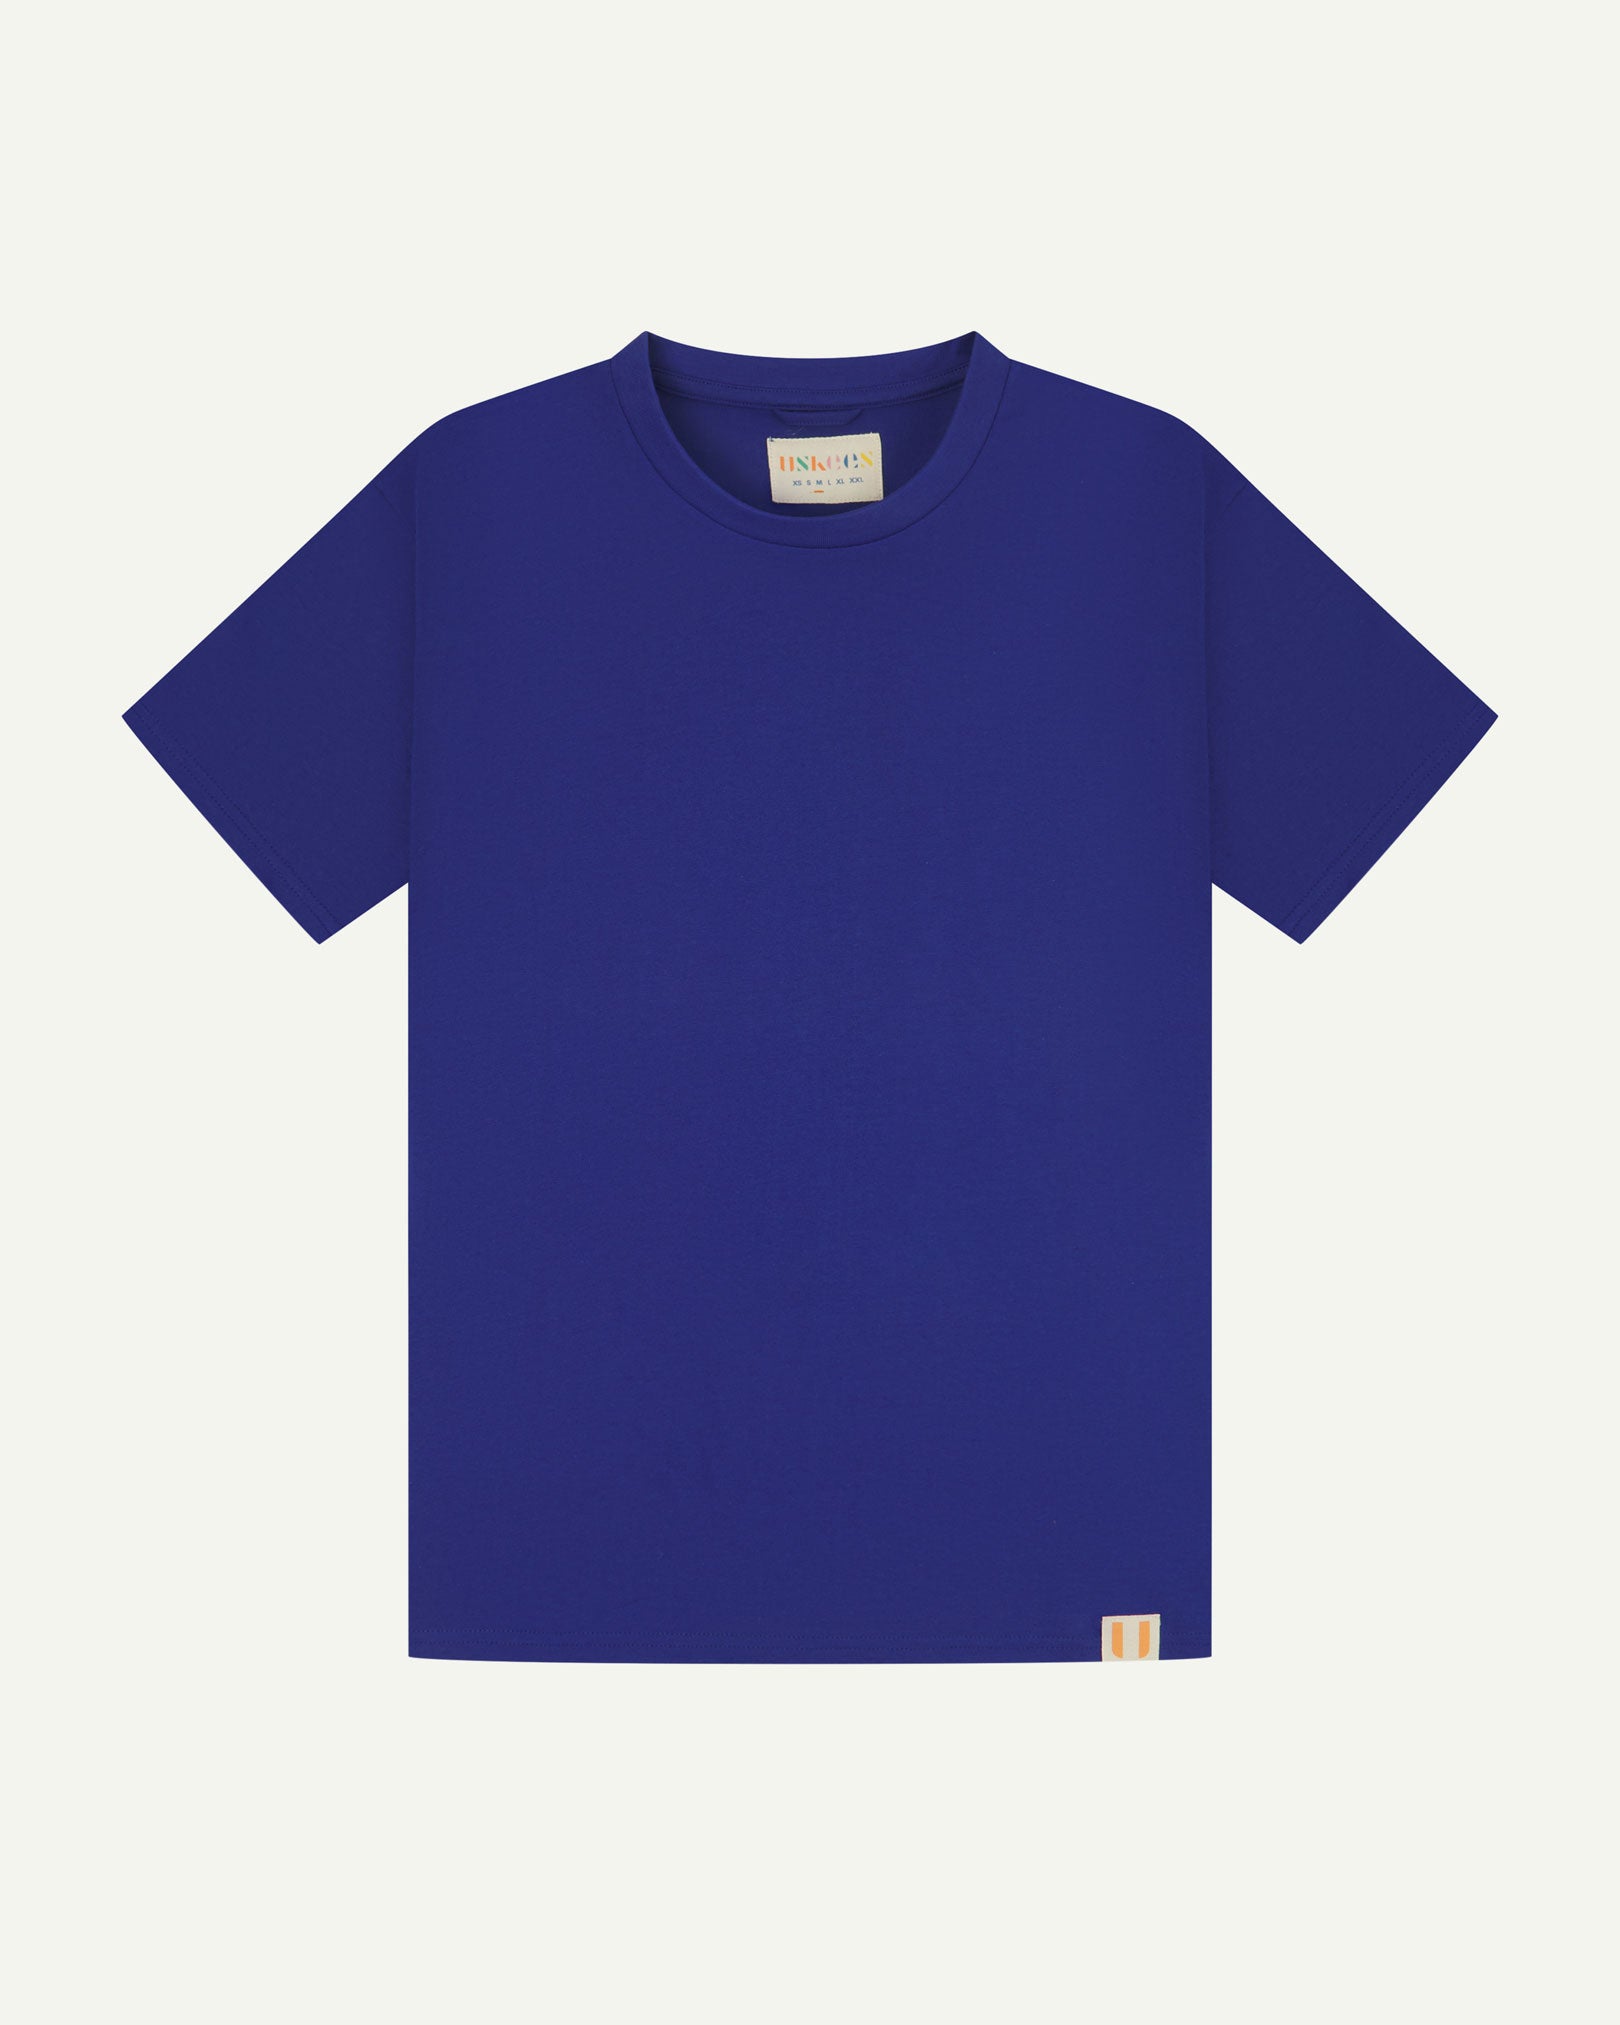 Full flat view of ultra blue organic cotton Uskees T-shirt for men.